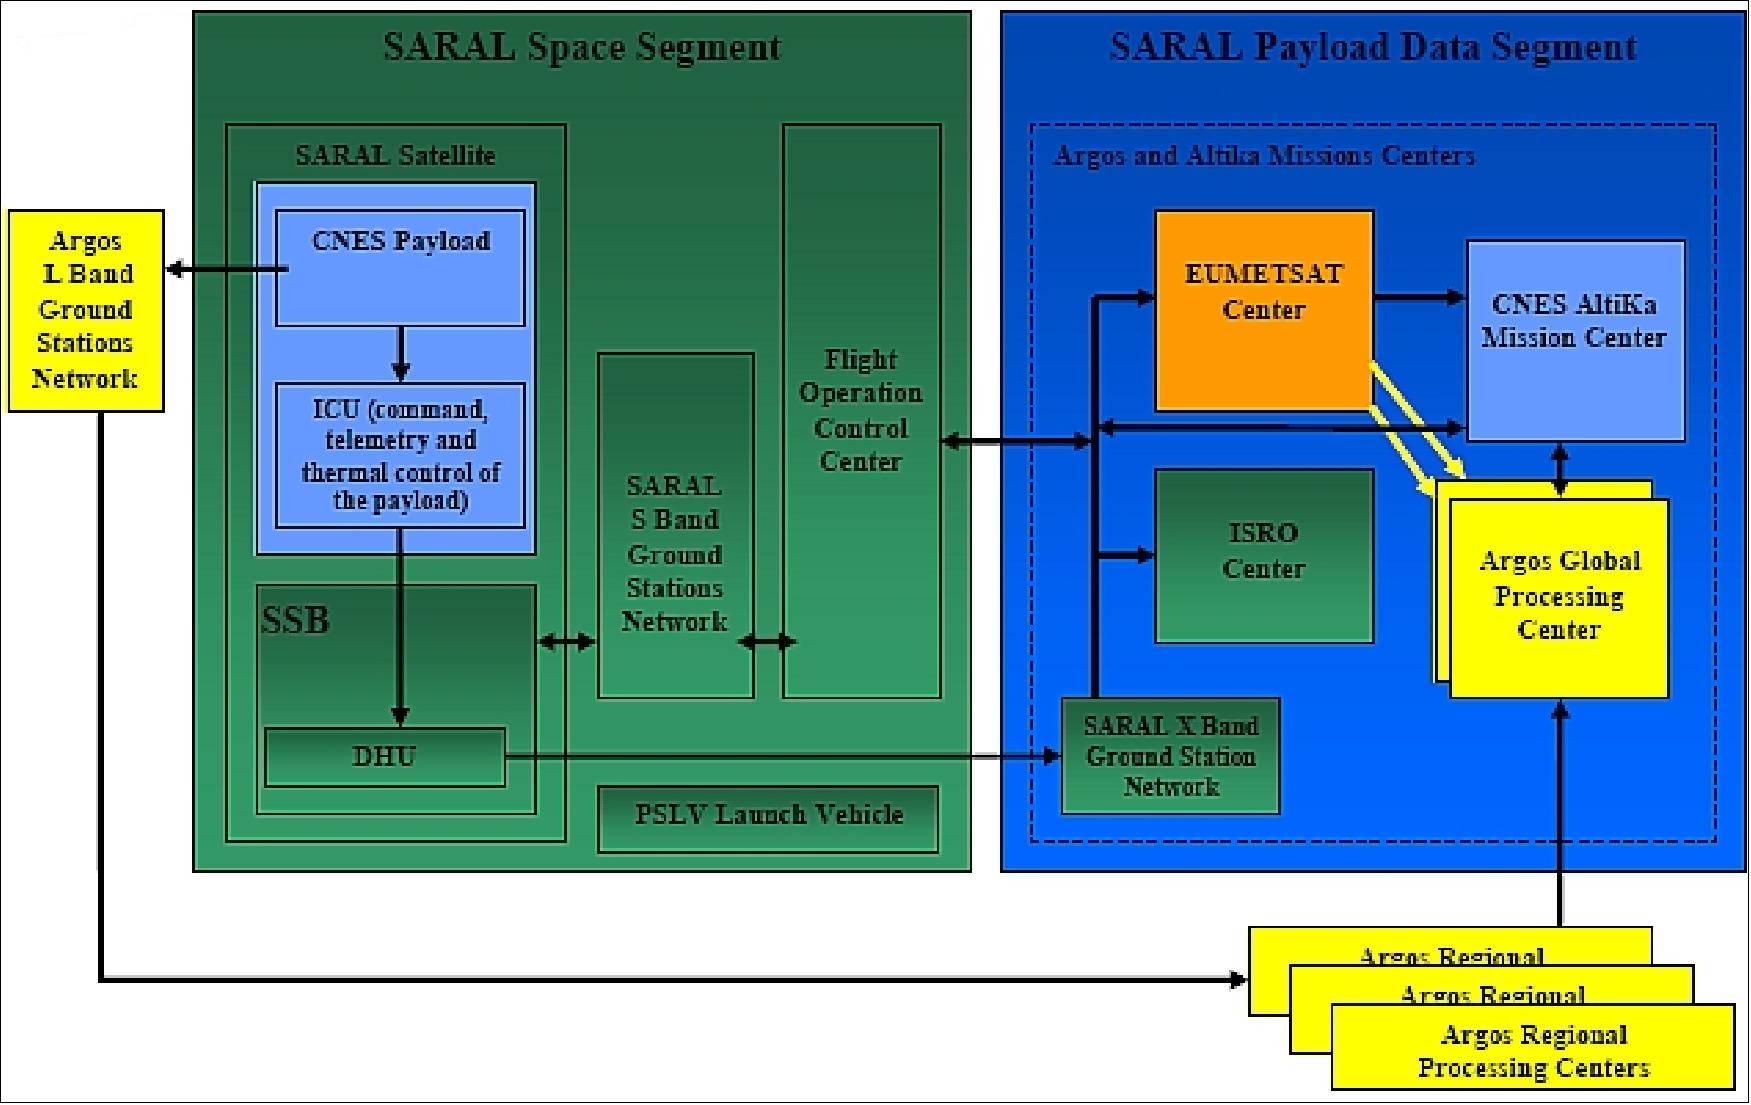 Figure 25: SARAL project organization (image credit: CNES)